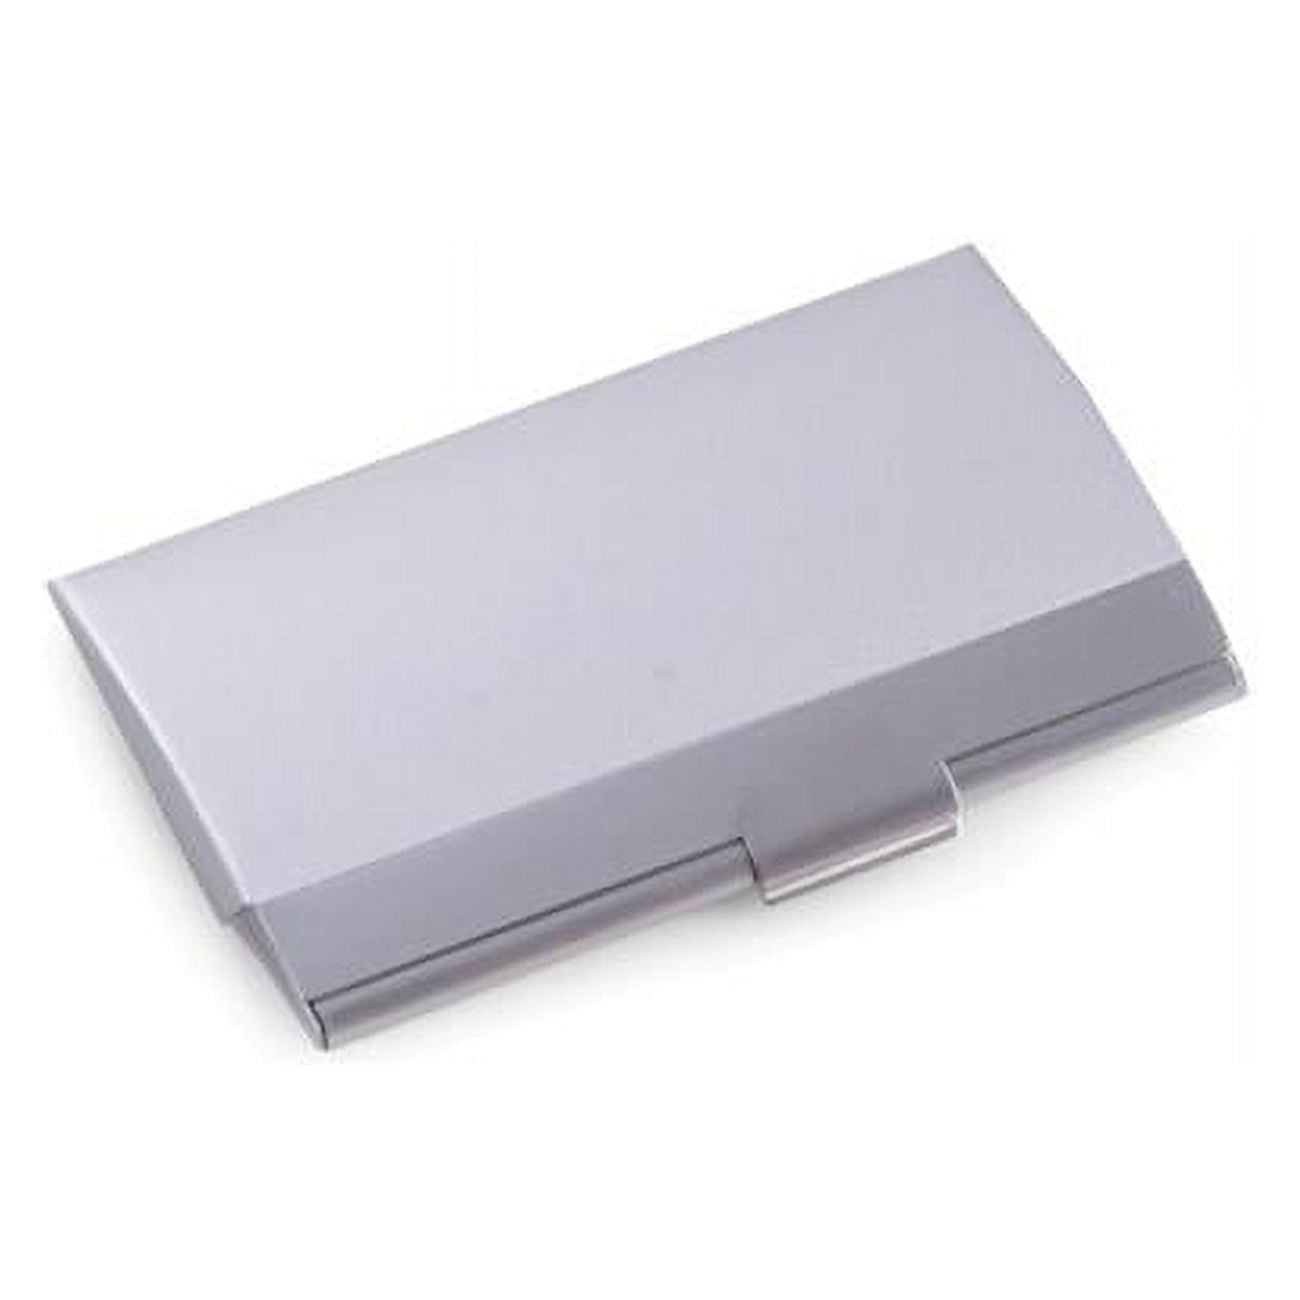 Picture of Bey-Berk International D291S Stainless Steel Business Card Case with Brushed Finish - Silver